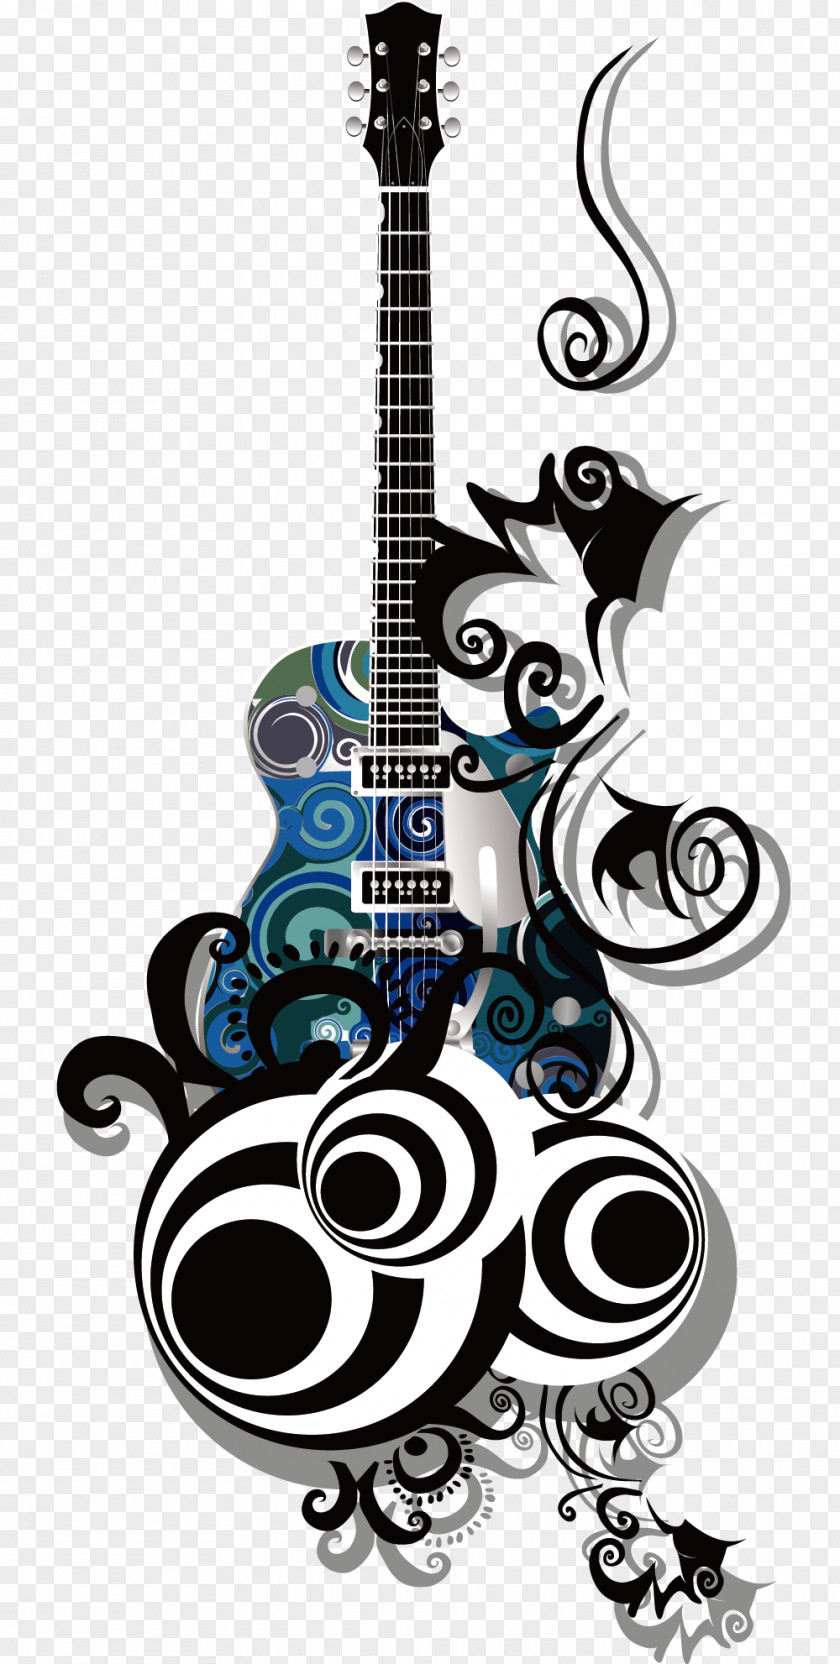 Guitar And Decorative Patterns Vector Material India Wall Decal Sticker PNG